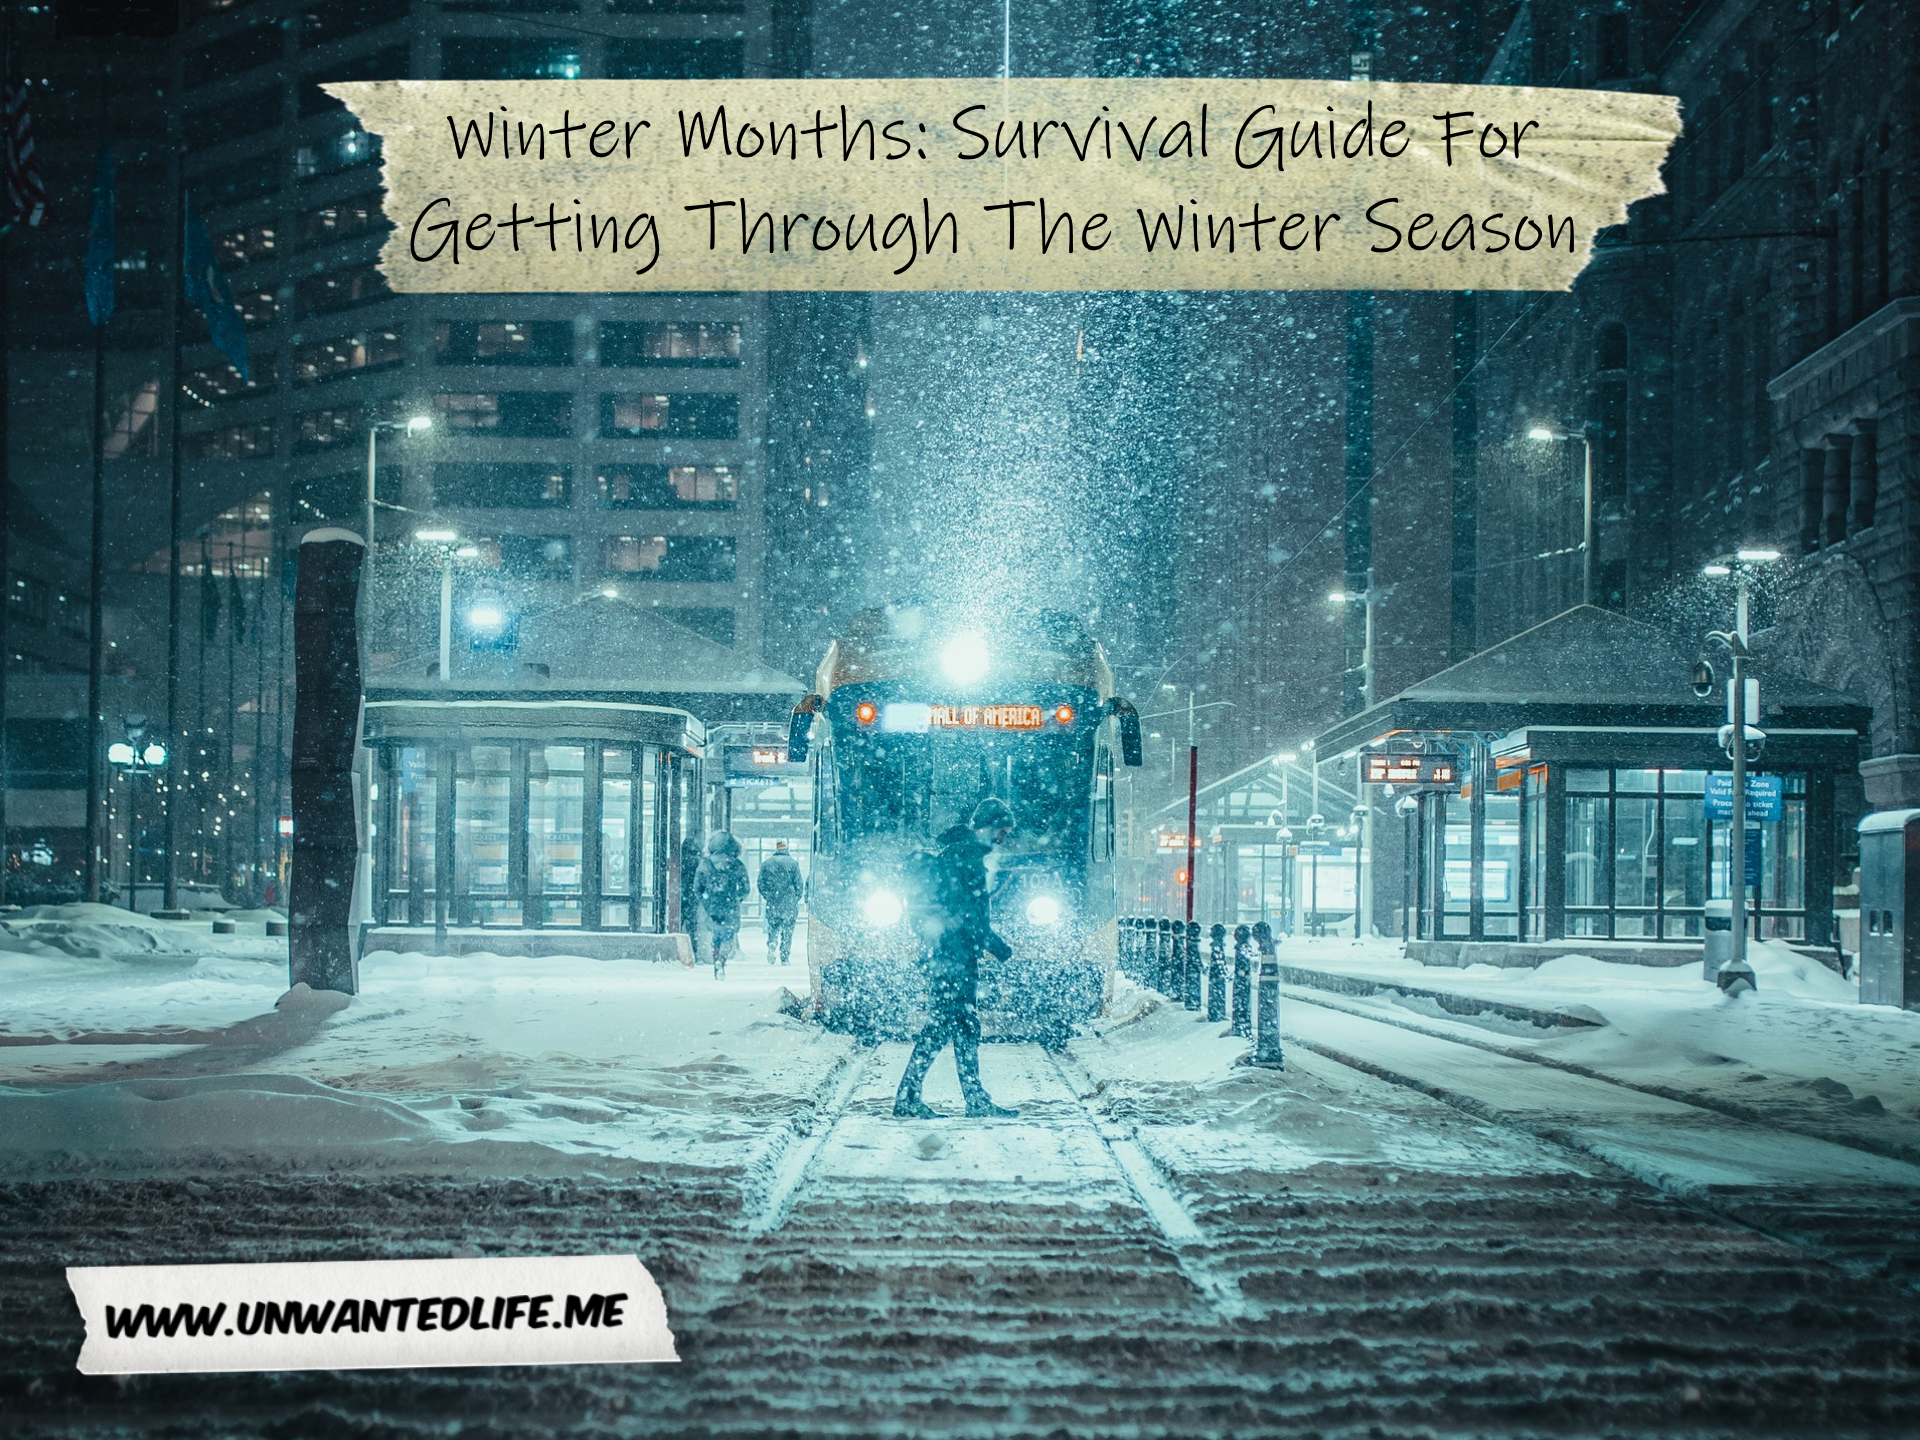 A photo of a very cold and snowy city as a person walks in front of a bus to represent the topic of the article - Winter Months Survival Guide For Getting Through The Winter Season